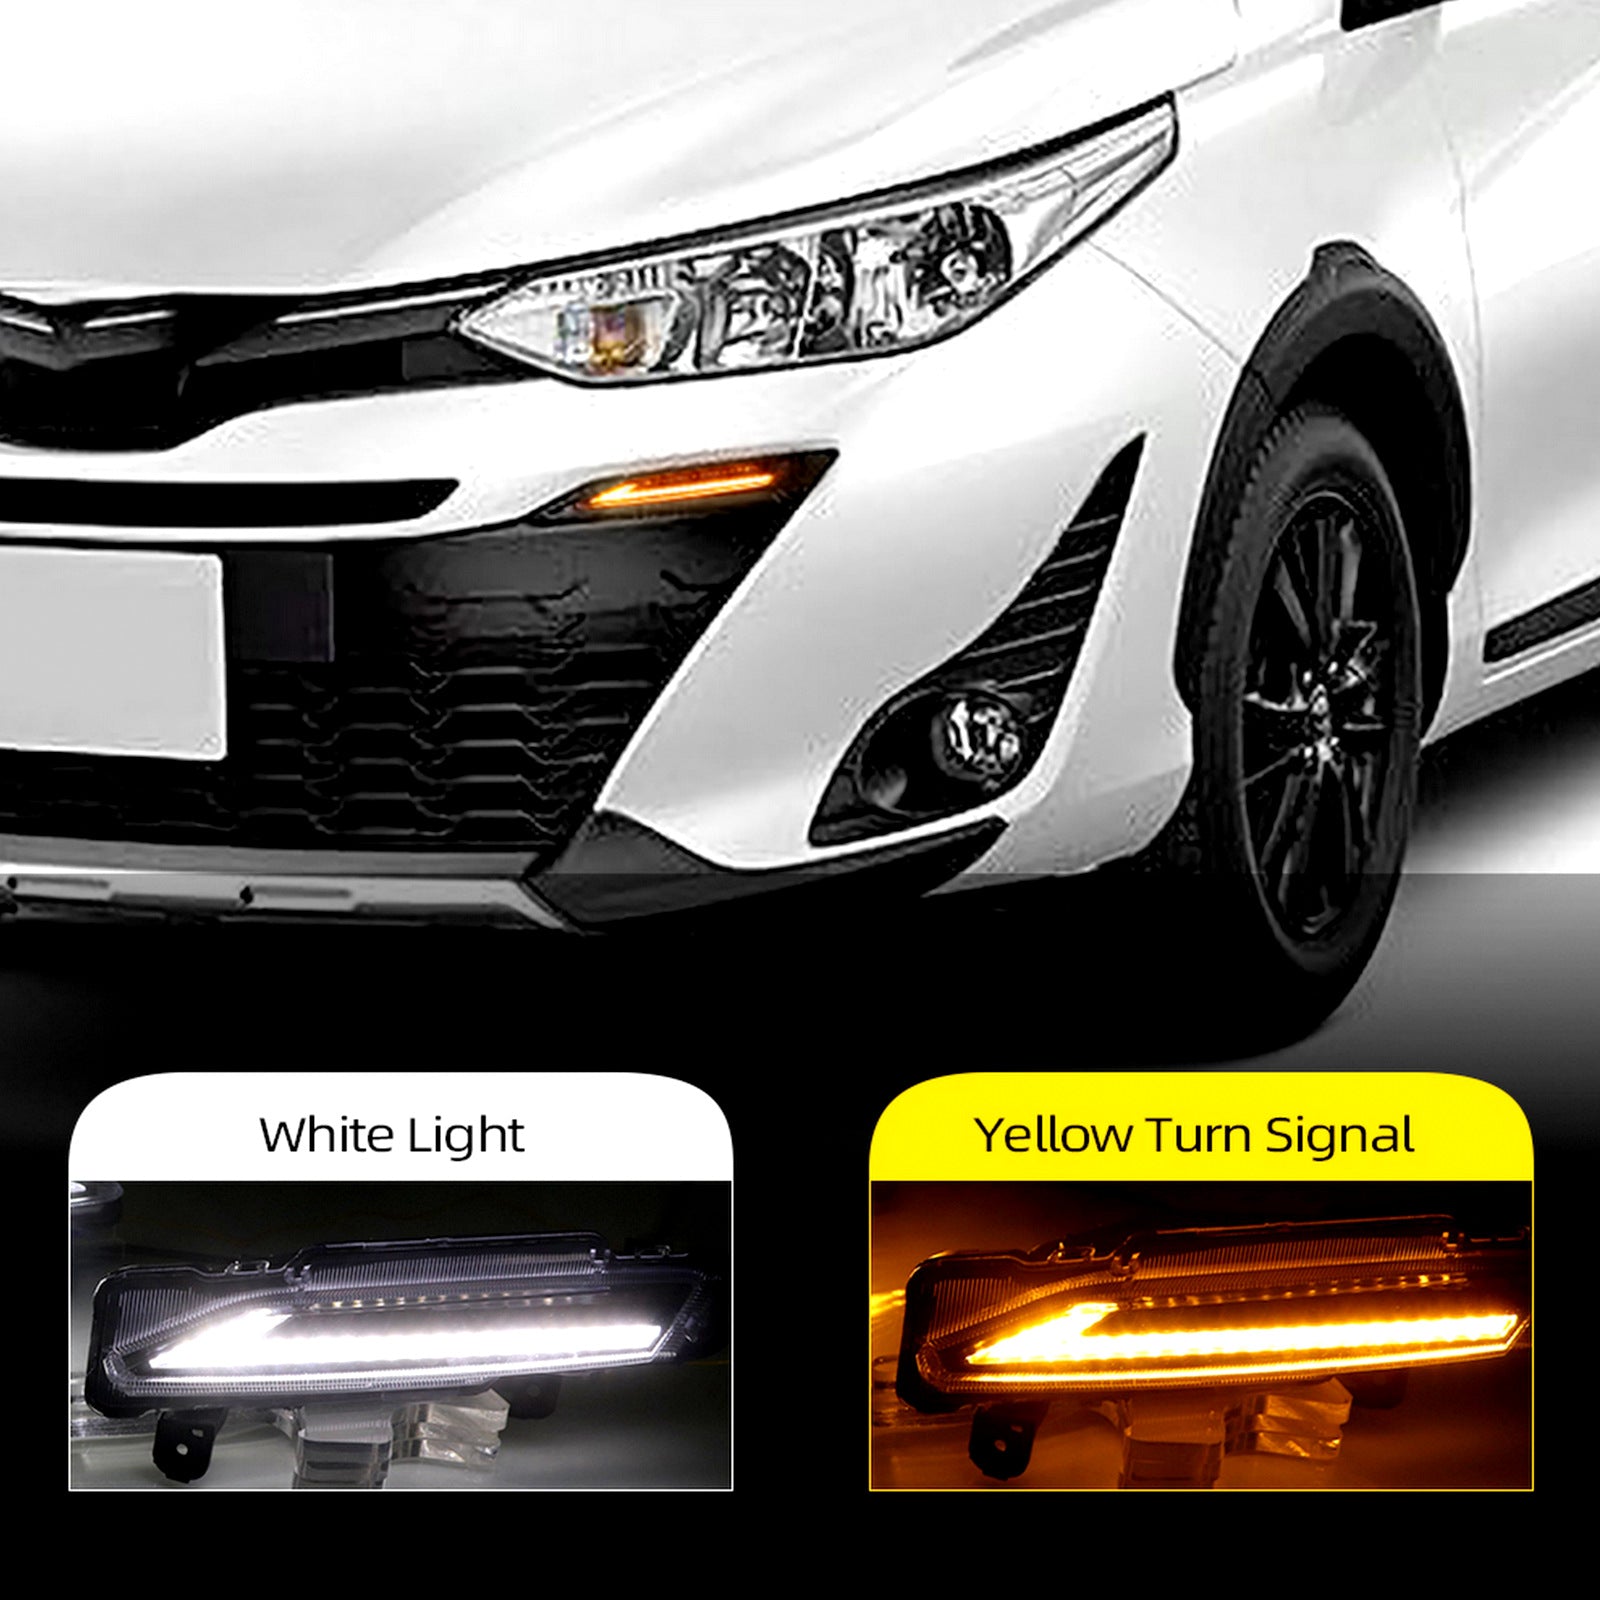 LIGHT TURN SIGNAL, DAY LIGHT DRL FIXED ON FRONT BUMPER FOR TOYOTA YARIS